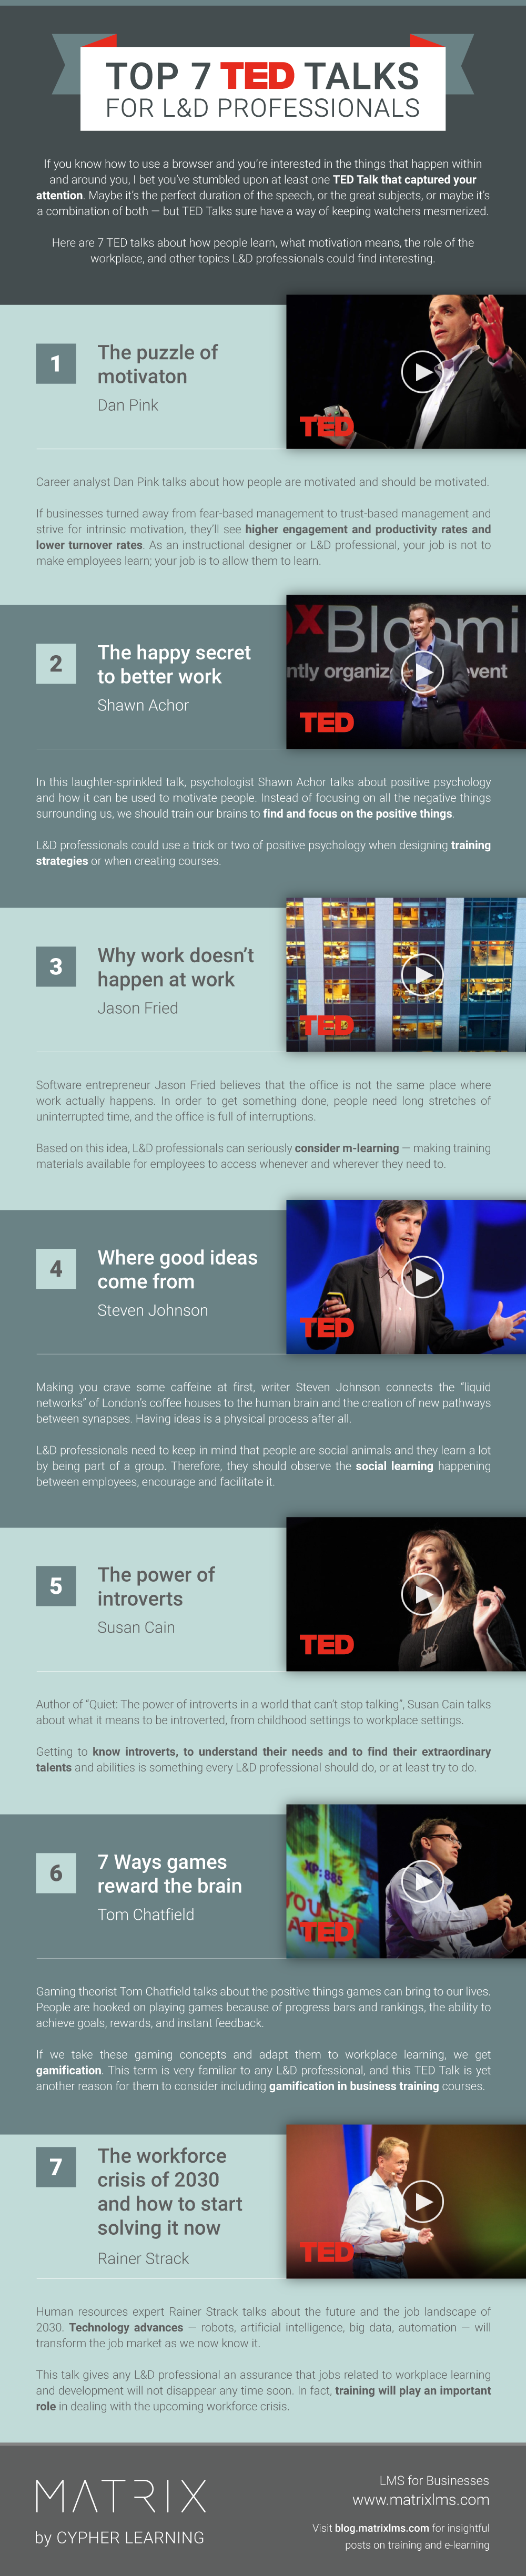 top-7-TED-talks-for-learning-and-development-professionals Infographic